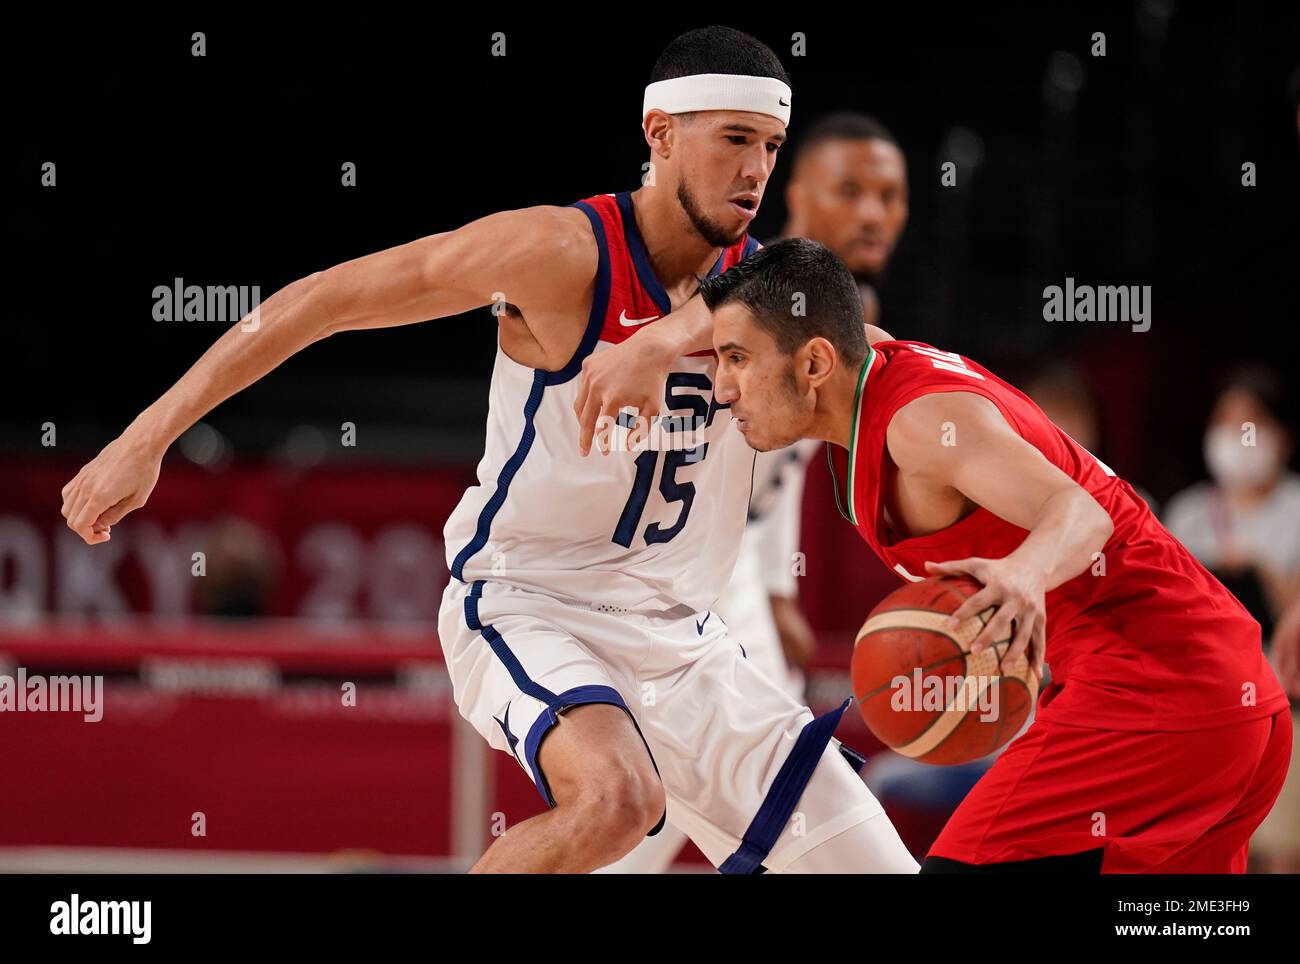 Iran's Mohammadsina Vahedi (3), right, is fouled by United States' Devin  Booker (15) during men's basketball